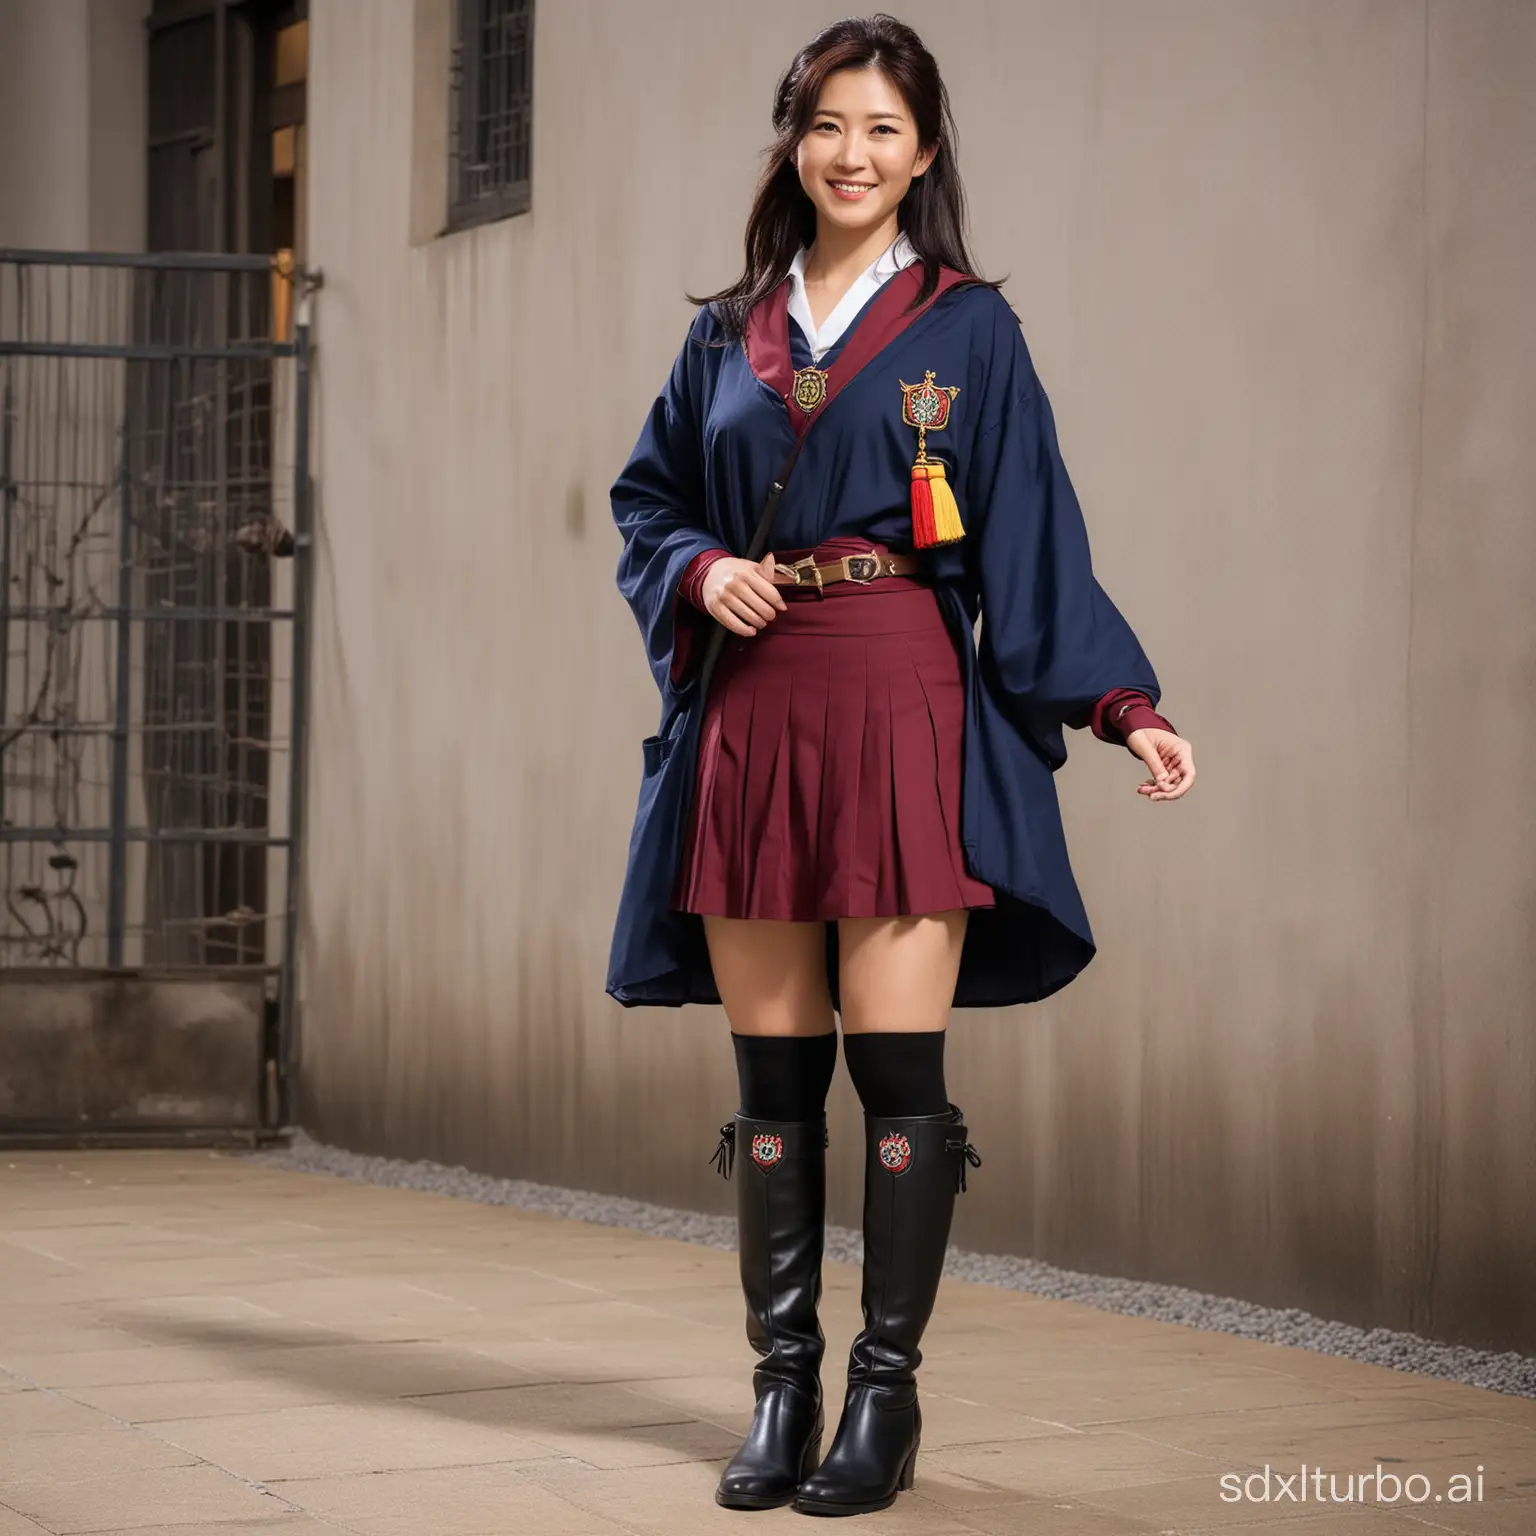 A Japanese woman 49 years old, she is wearing  a long half-up pulled back hairstyle with black locks dressed in Hogwarts student school: a dark blue robes adorned with a wizard school emblem and a dark red wine knee height skirt; wearing black boots, with a smile, in a full body standing photo.